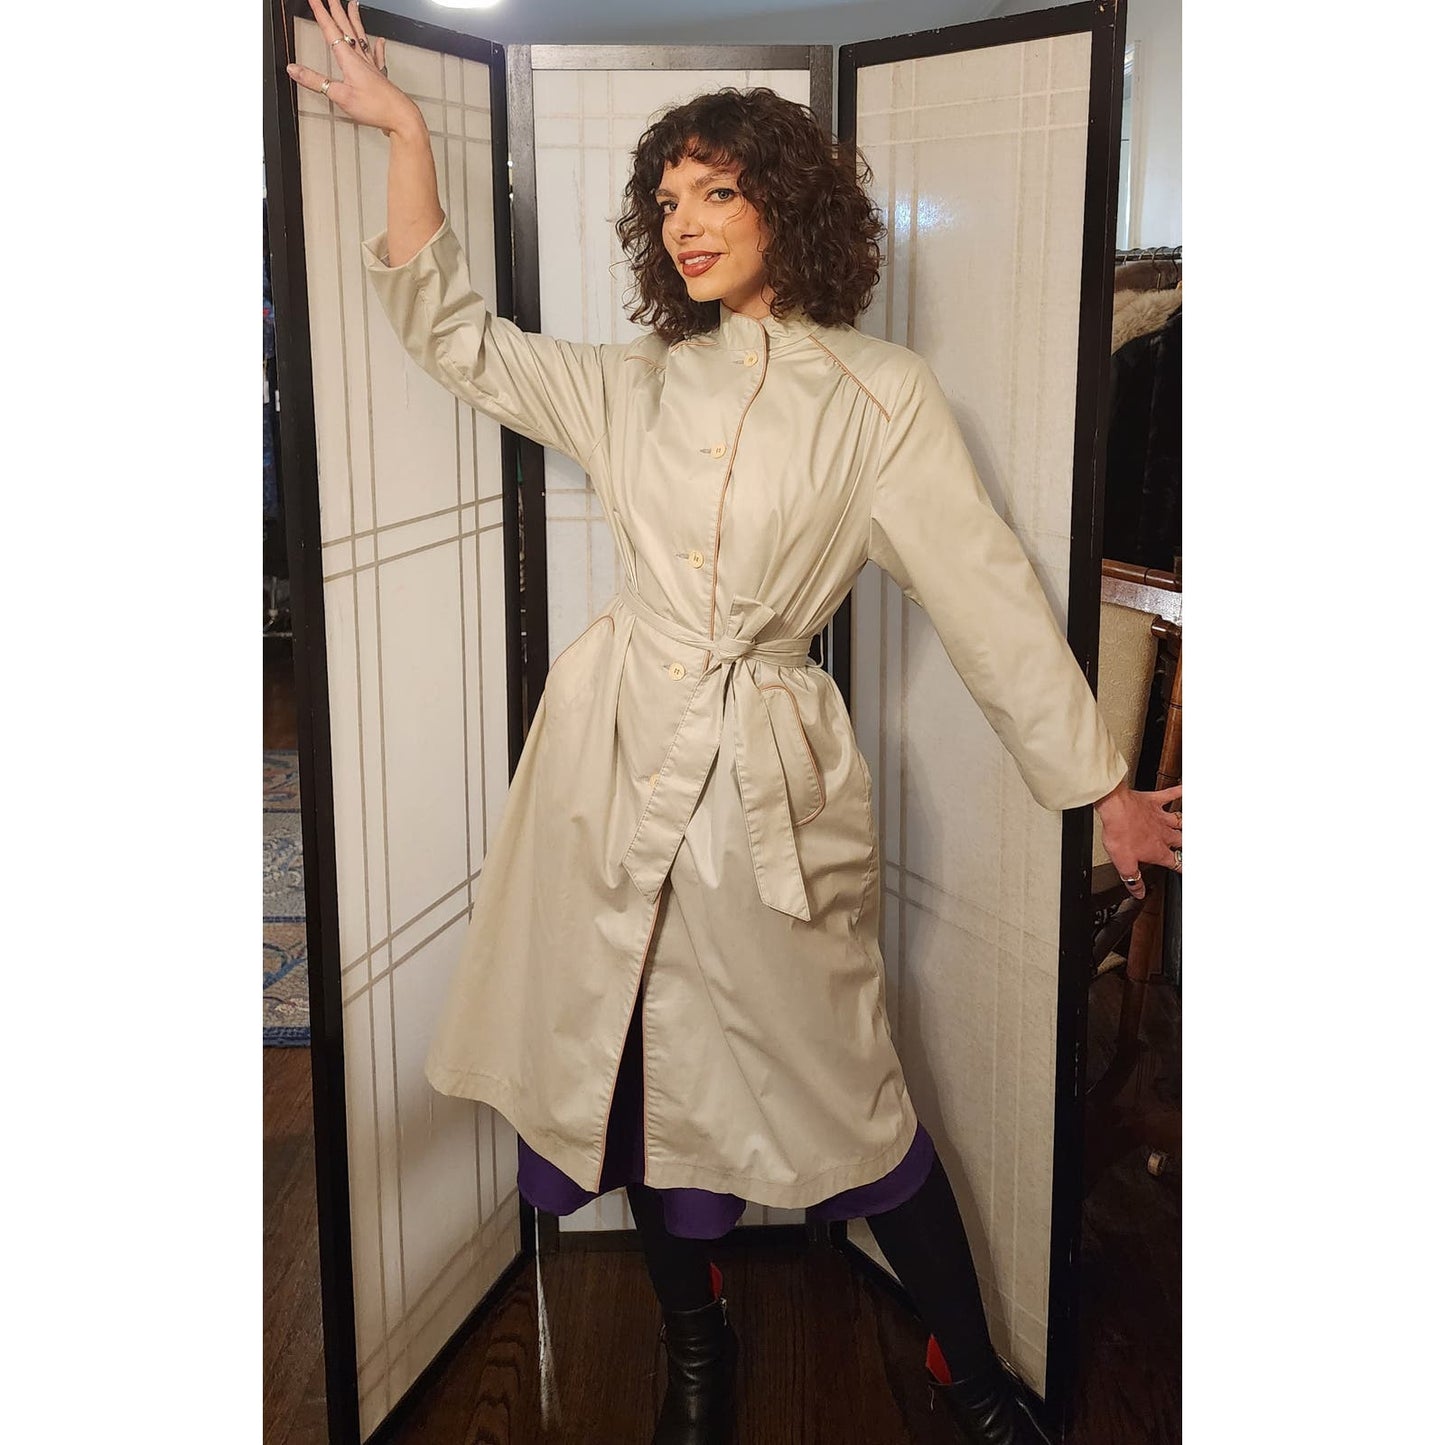 Vintage 70s Trench Coat Gray with Belt by Smug